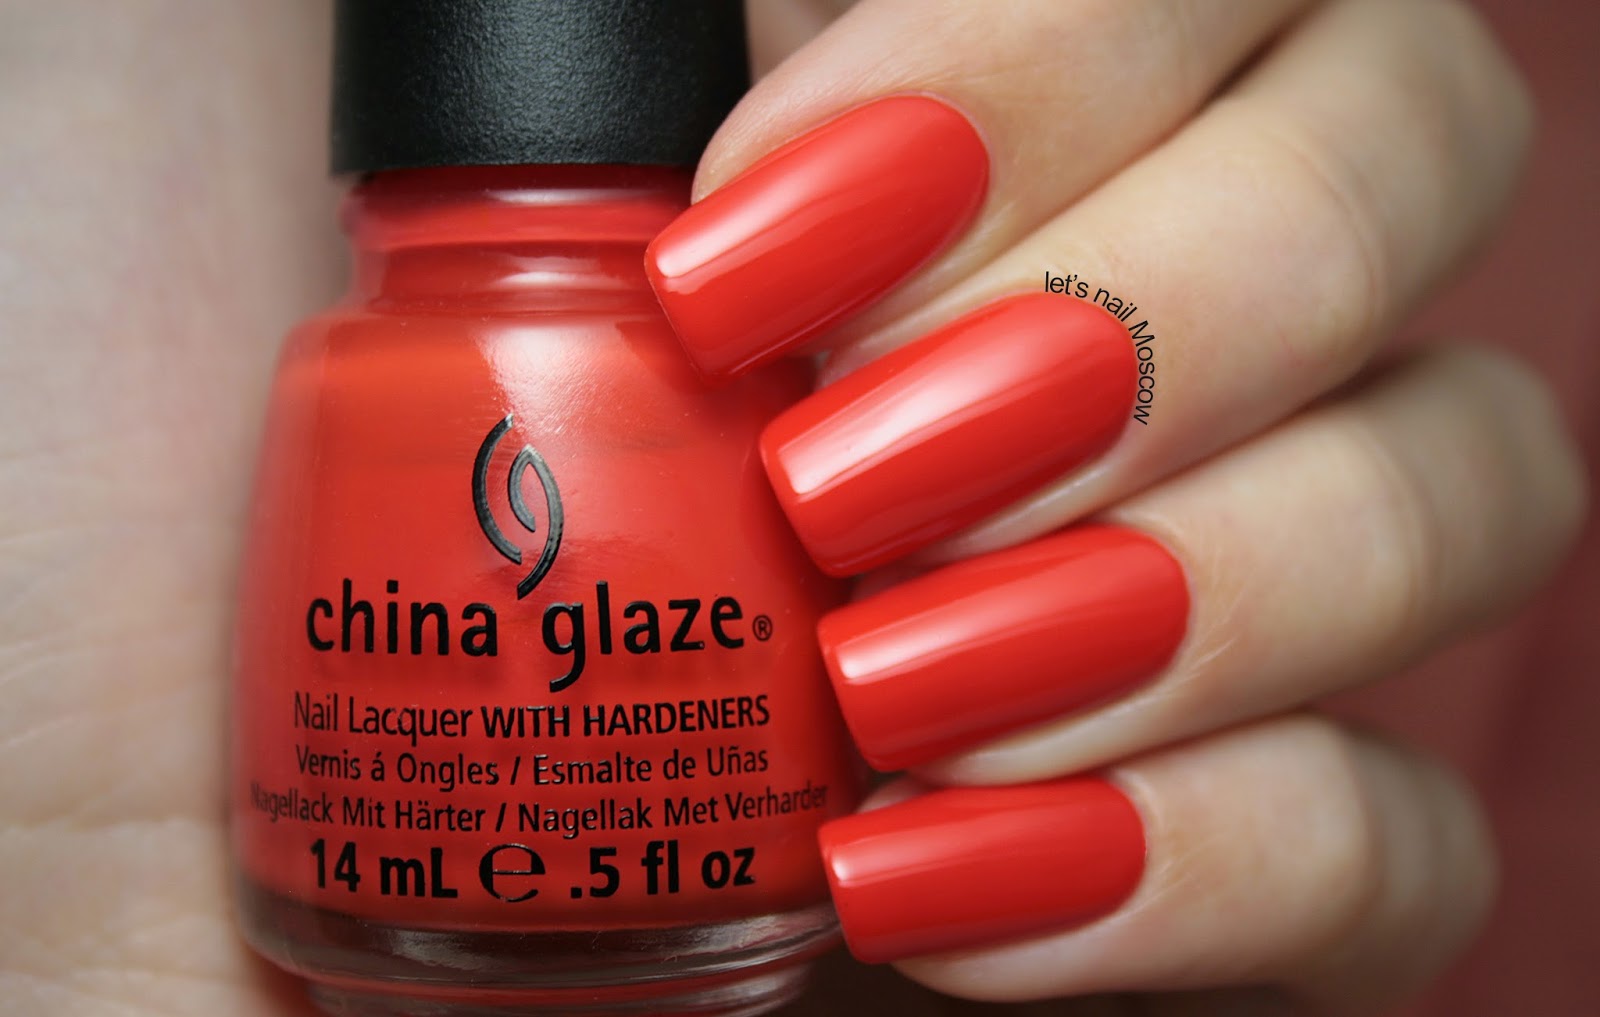 5. China Glaze Nail Lacquer in "Street Style Princess" - wide 1